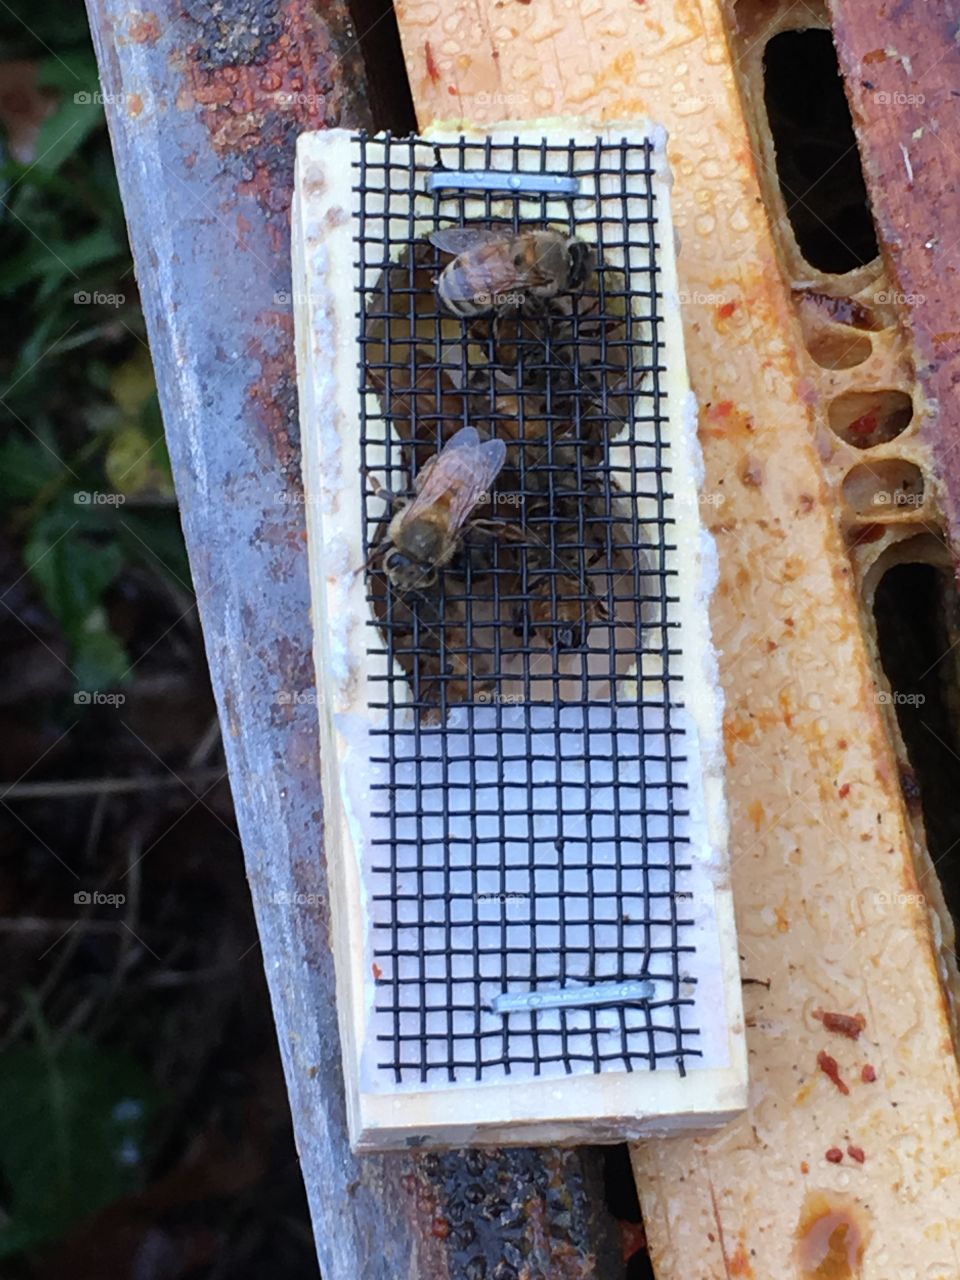 Queen cage honeybee installation to apiary